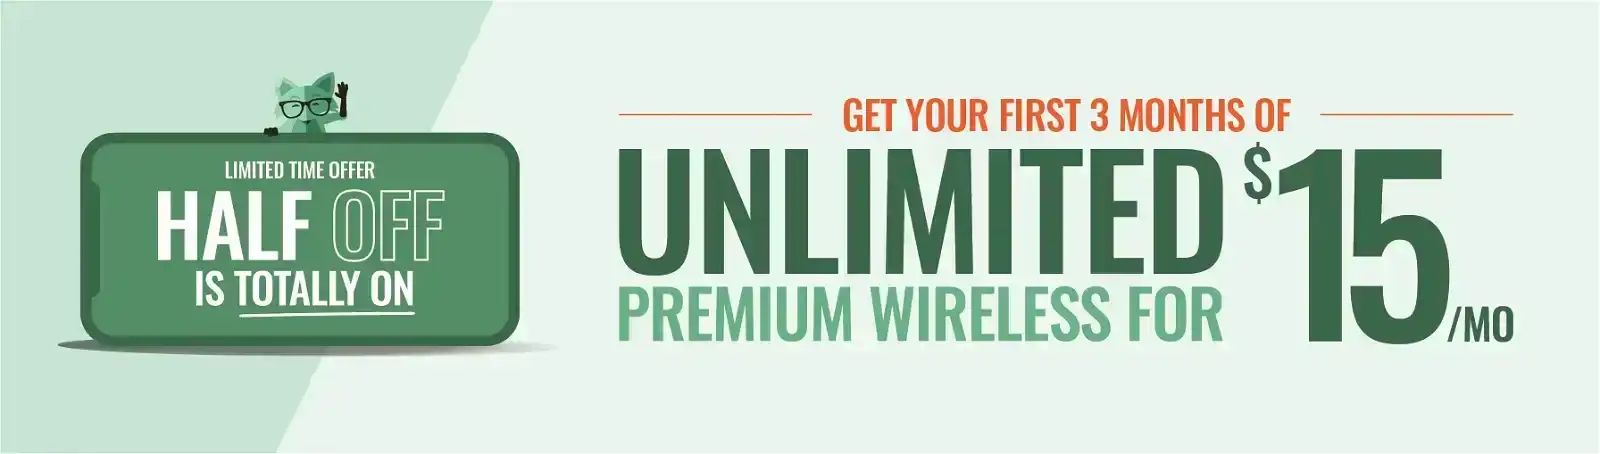 New Customer Offer - Half Off is Totally On. Get 3 months of Unlimited Premium Wireless for \\$15/mo